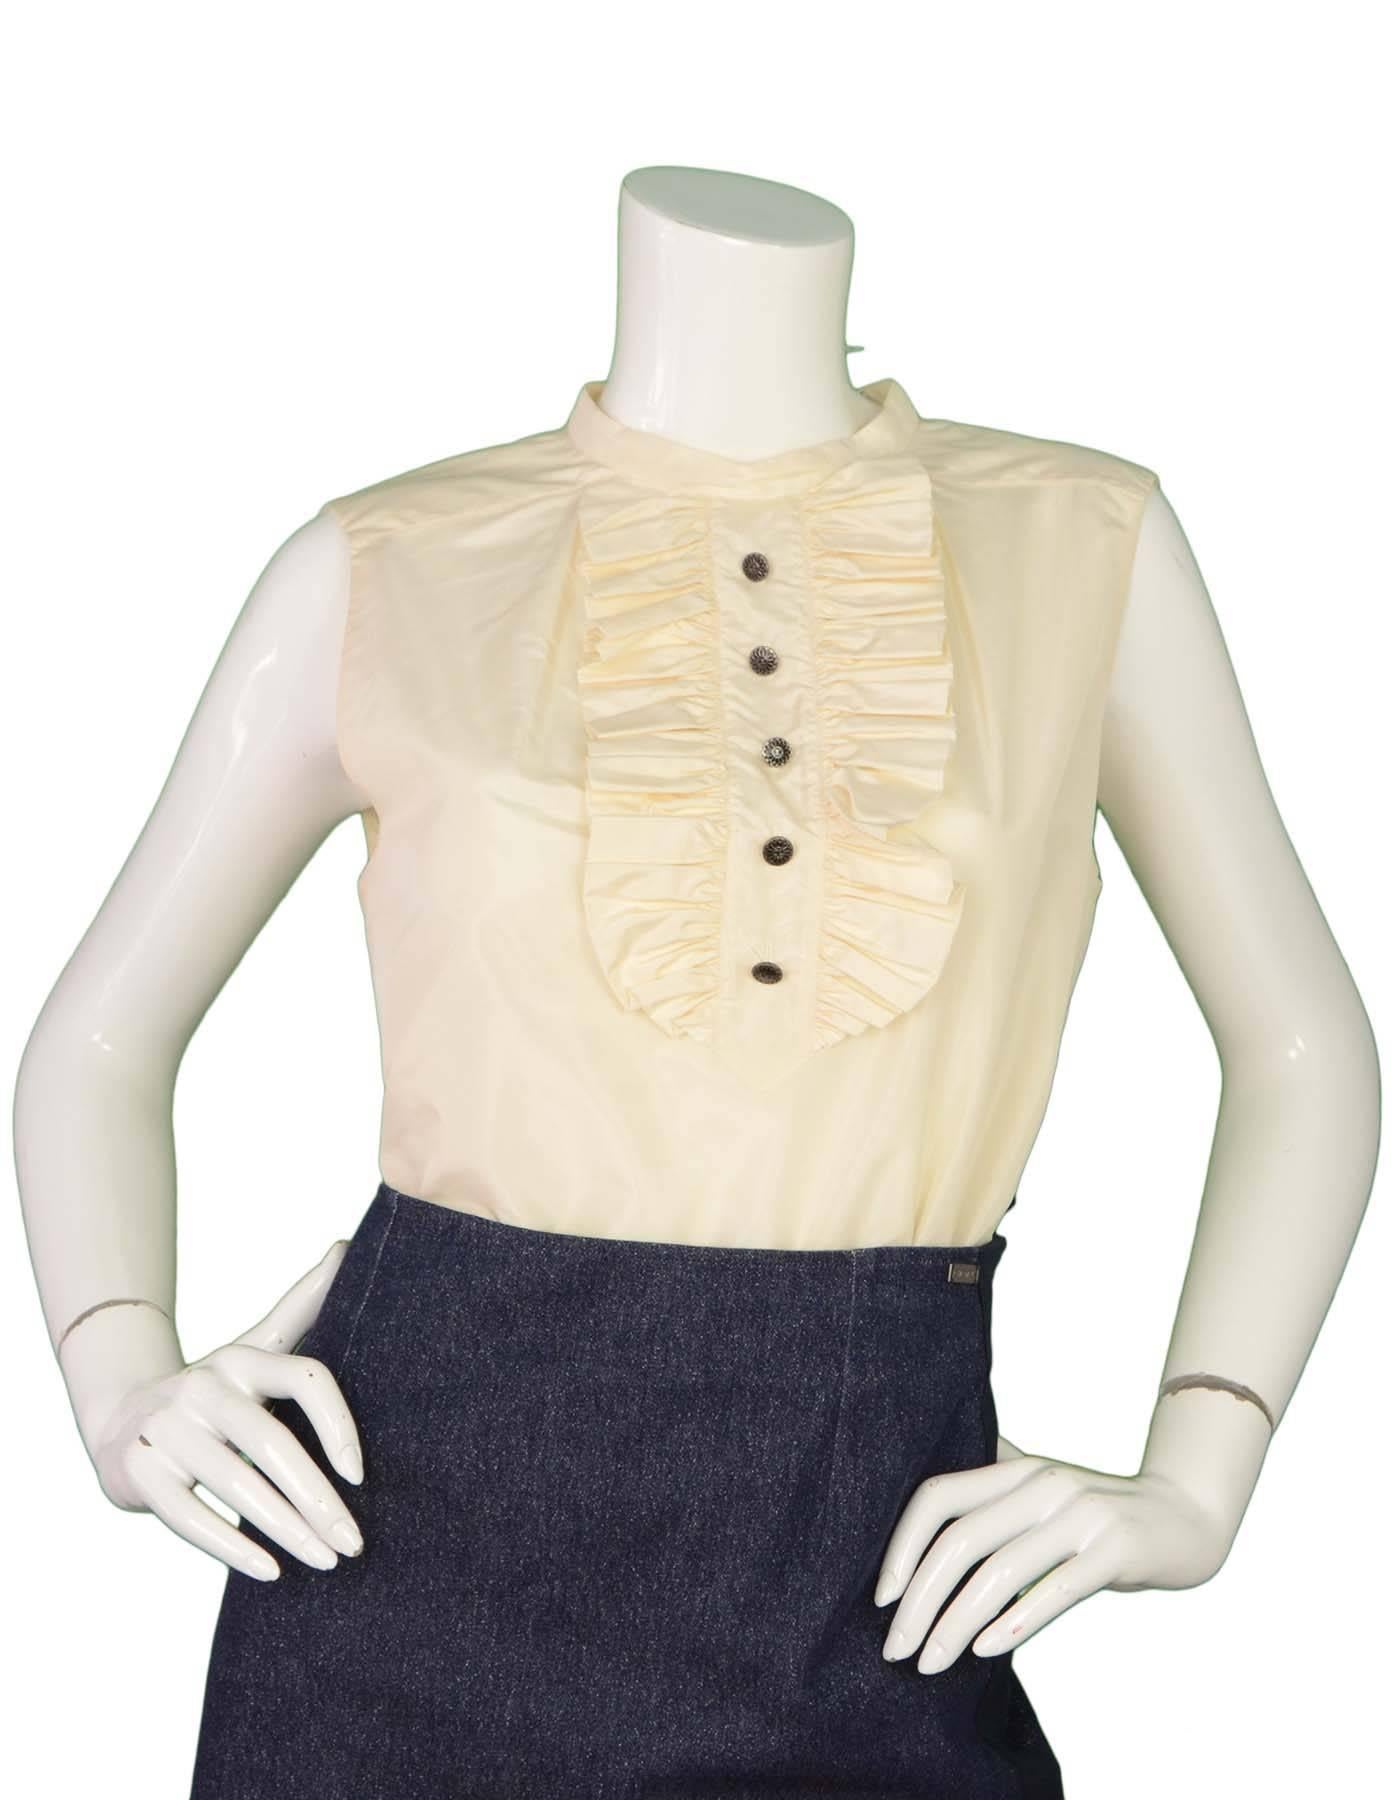 Chanel Silk Sleeveless Top 
Features ruffles at center bust with decorative buttons
Made In: France
Year of Production: 2006
Color: Ivory
Composition: 100% silk
Lining: None
Closure/opening: Back center hidden button down closure
Exterior